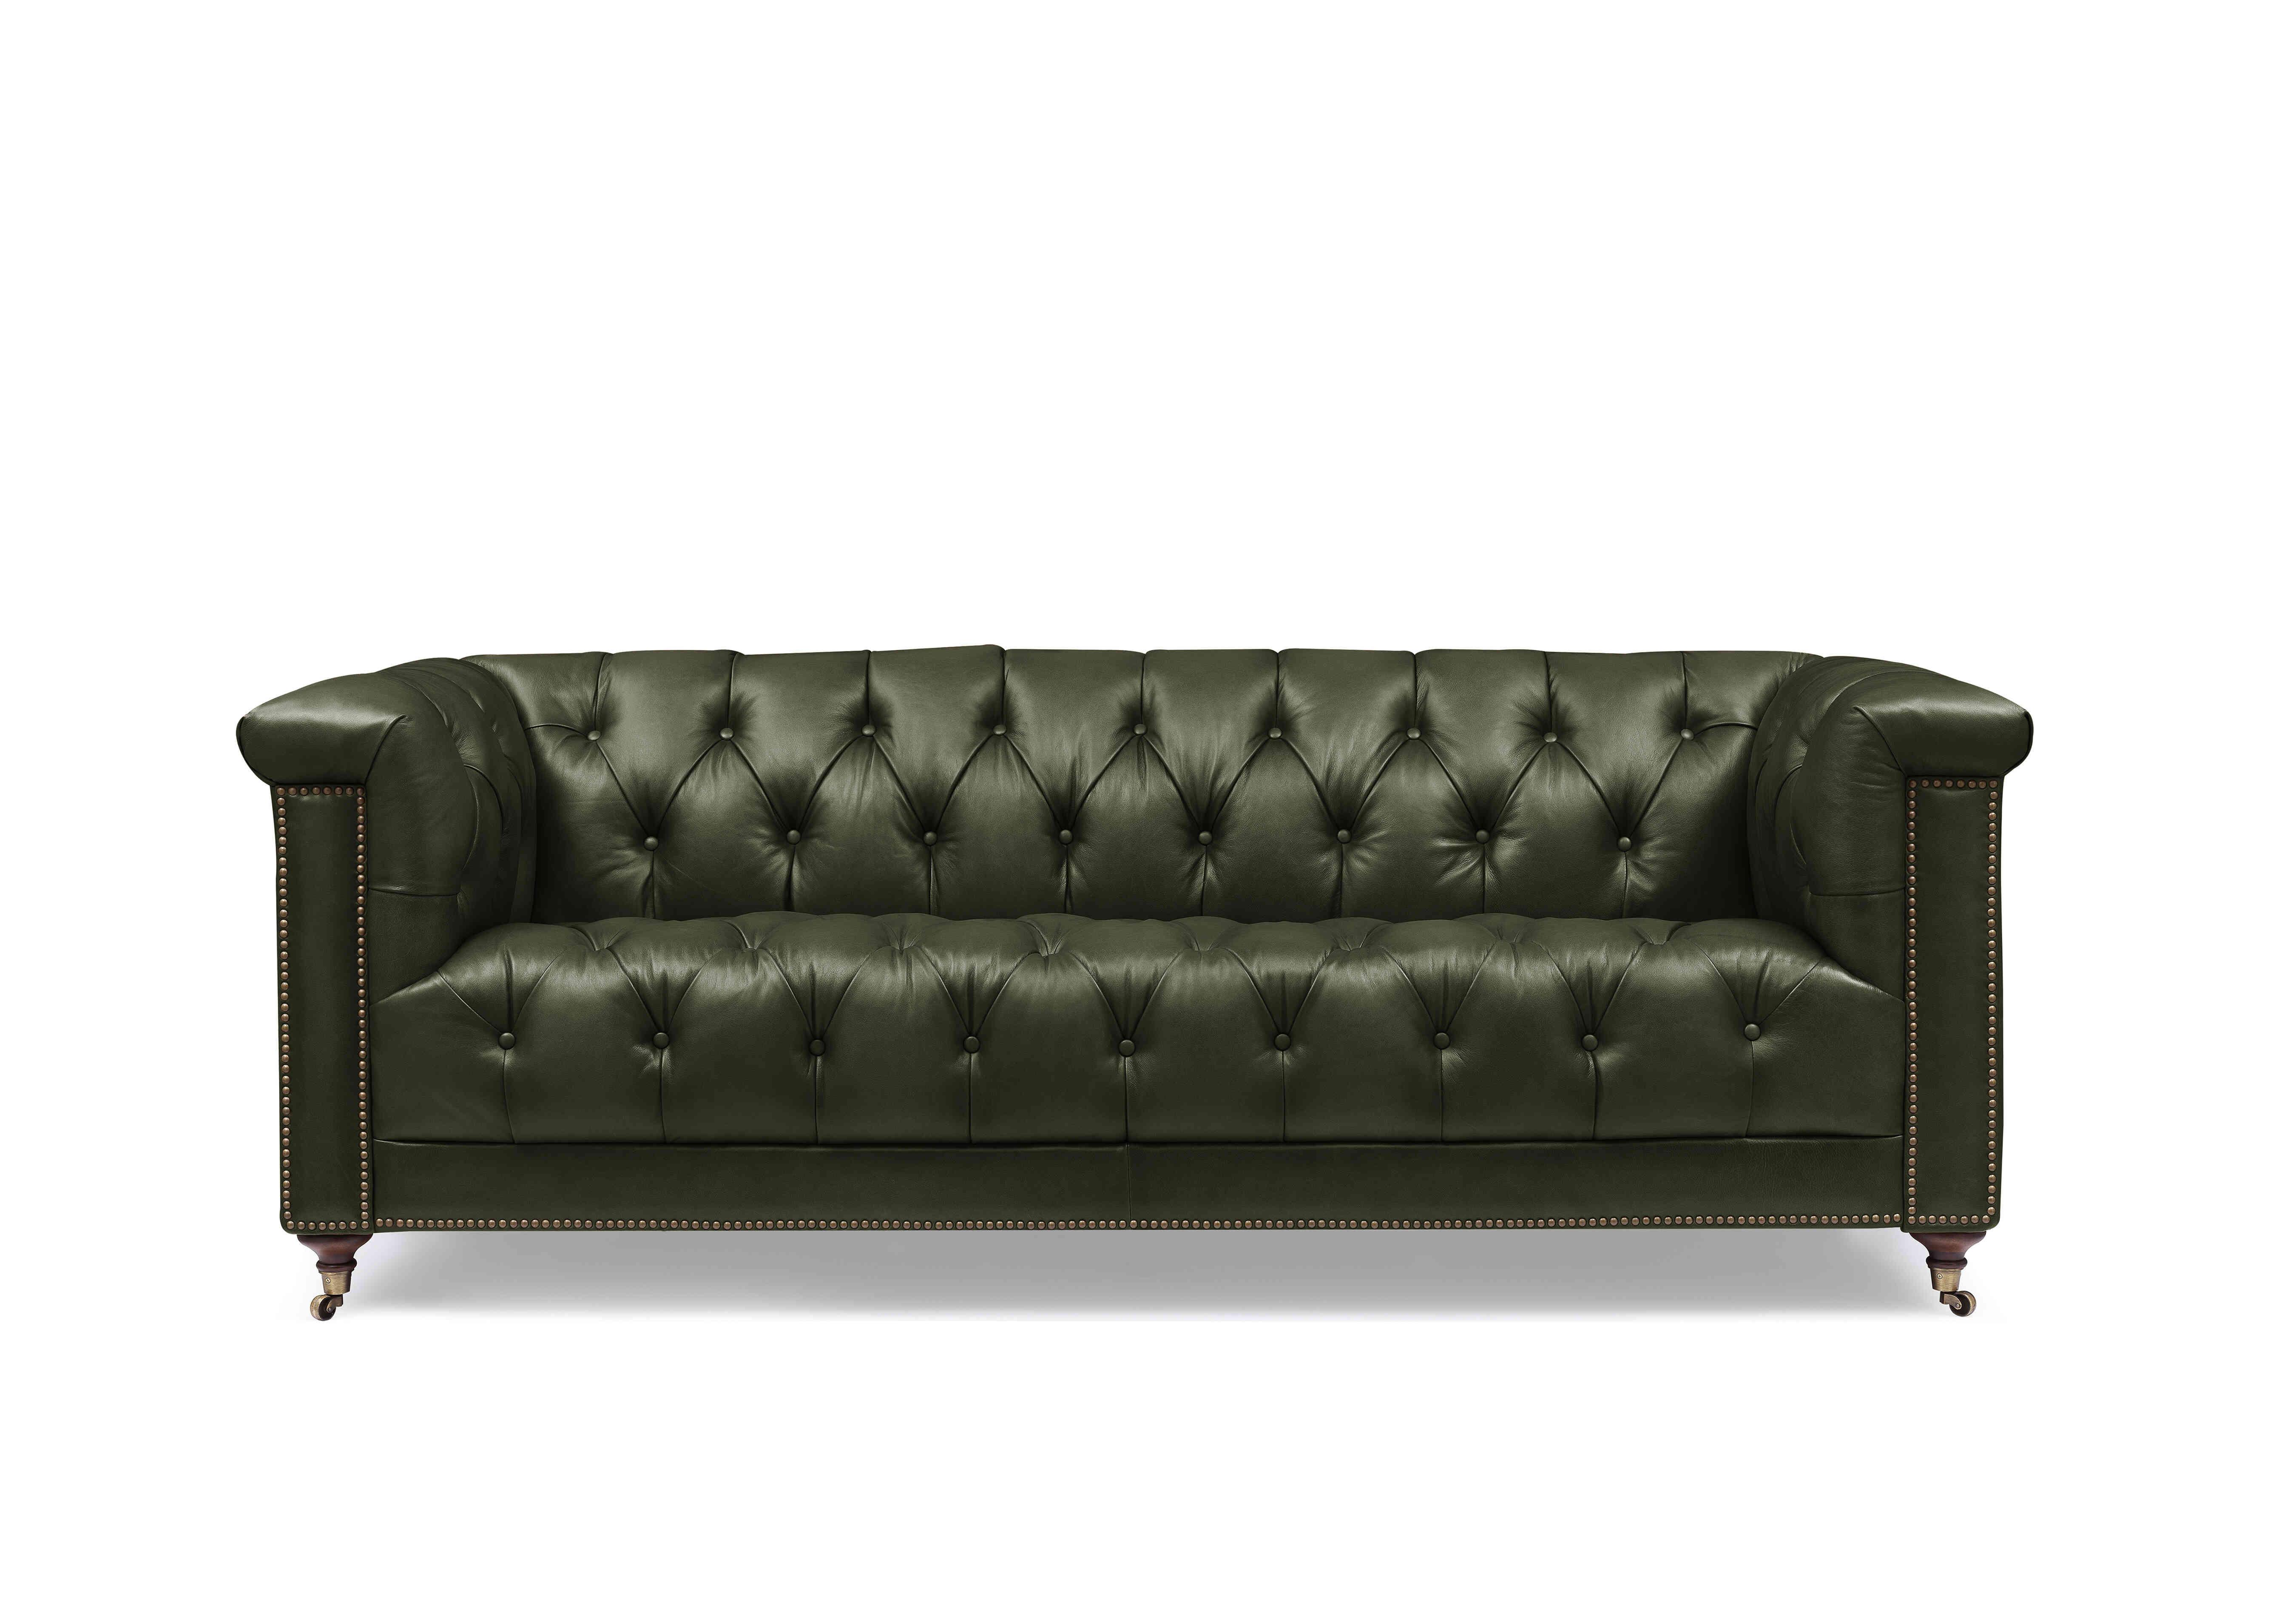 Wallace 3 Seater Leather Chesterfield Sofa in X3y1-1965ls Emerald on Furniture Village